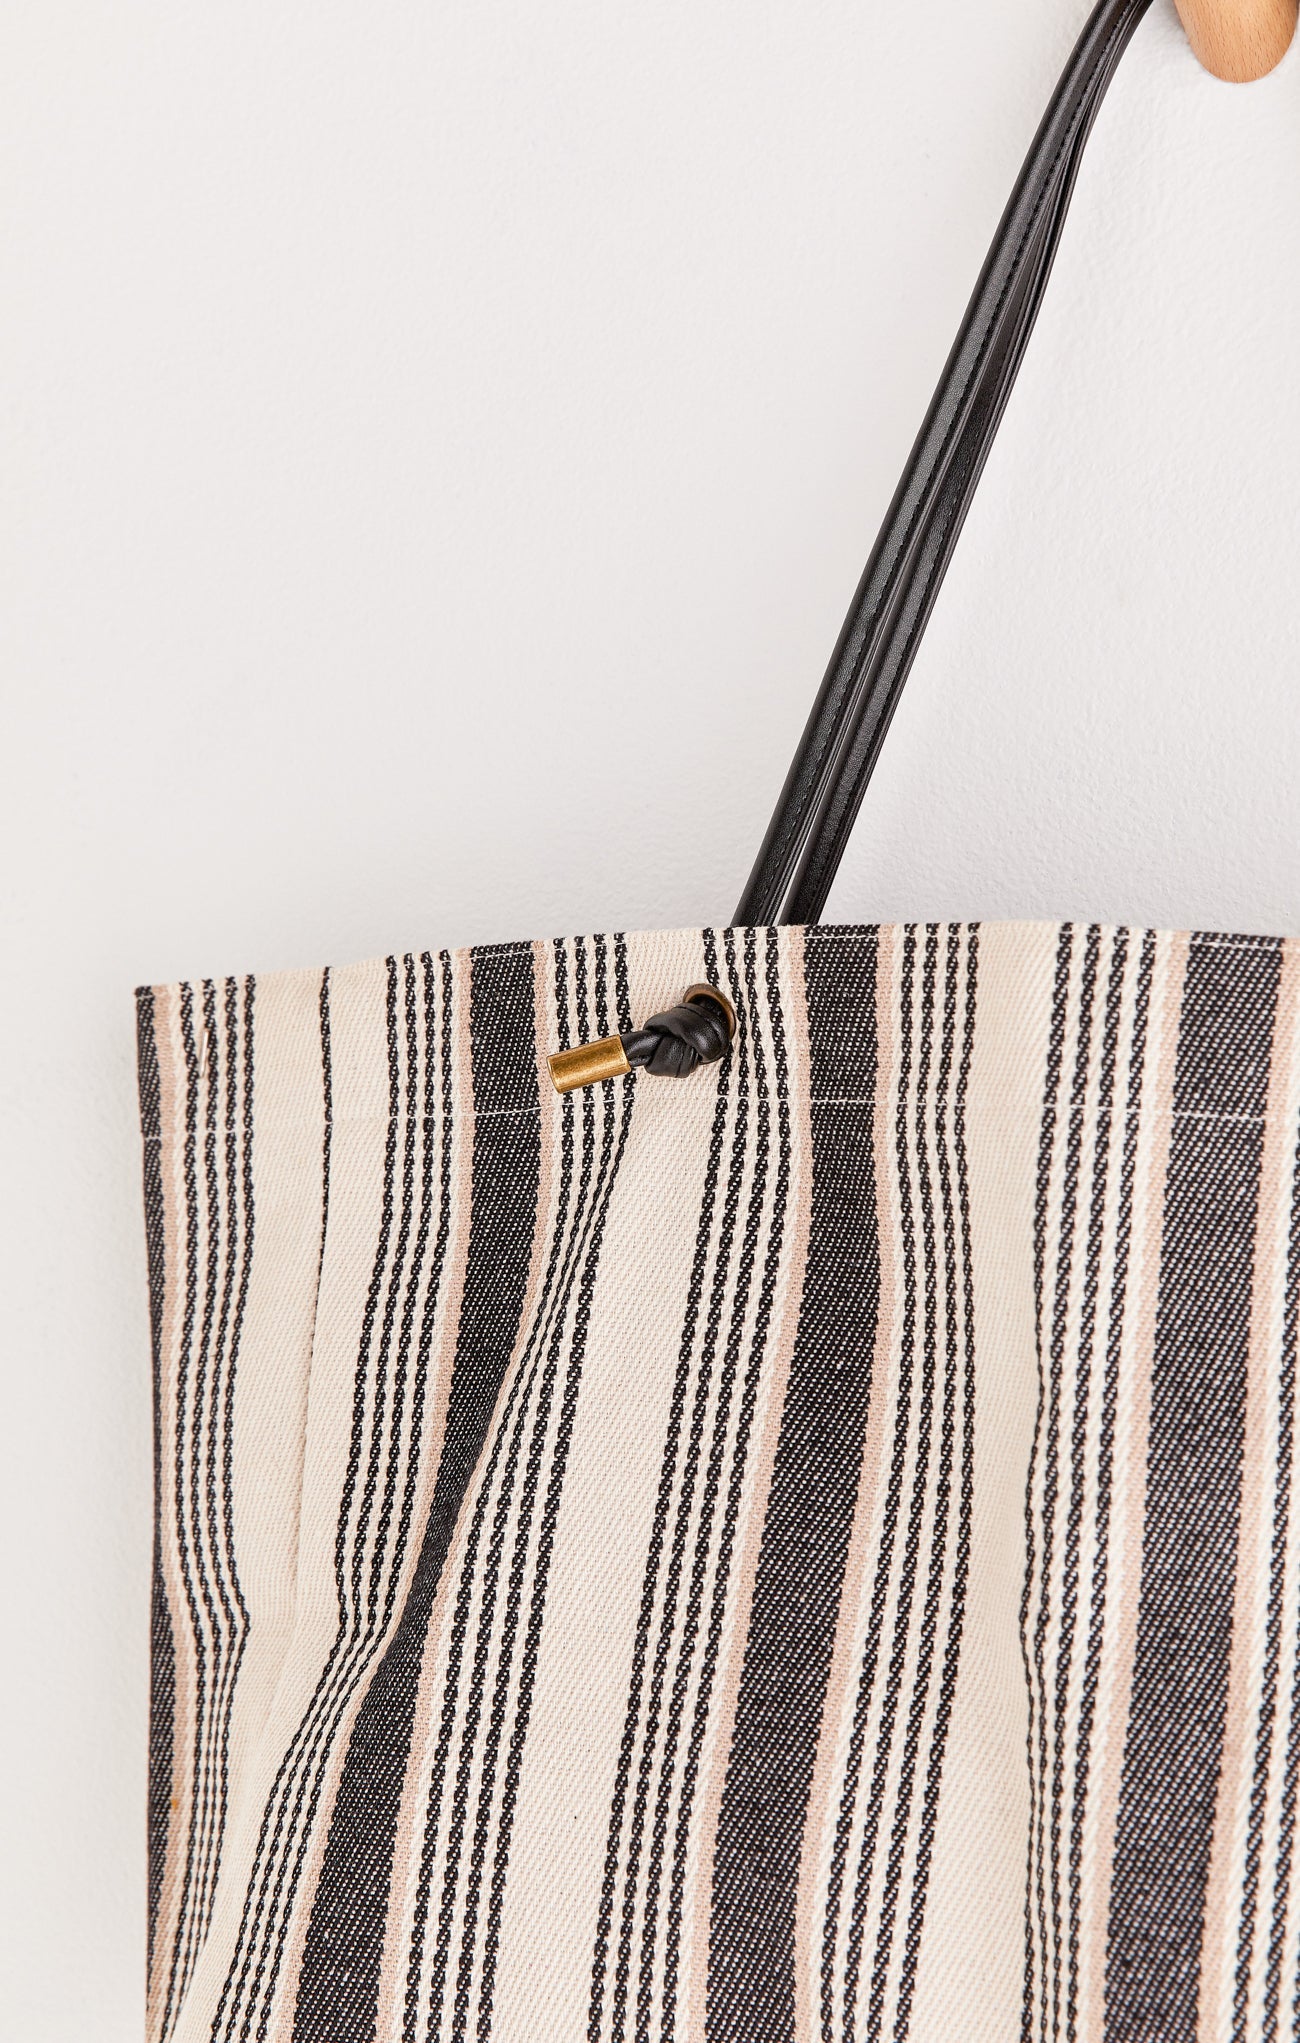 Carry All Stripe Tote